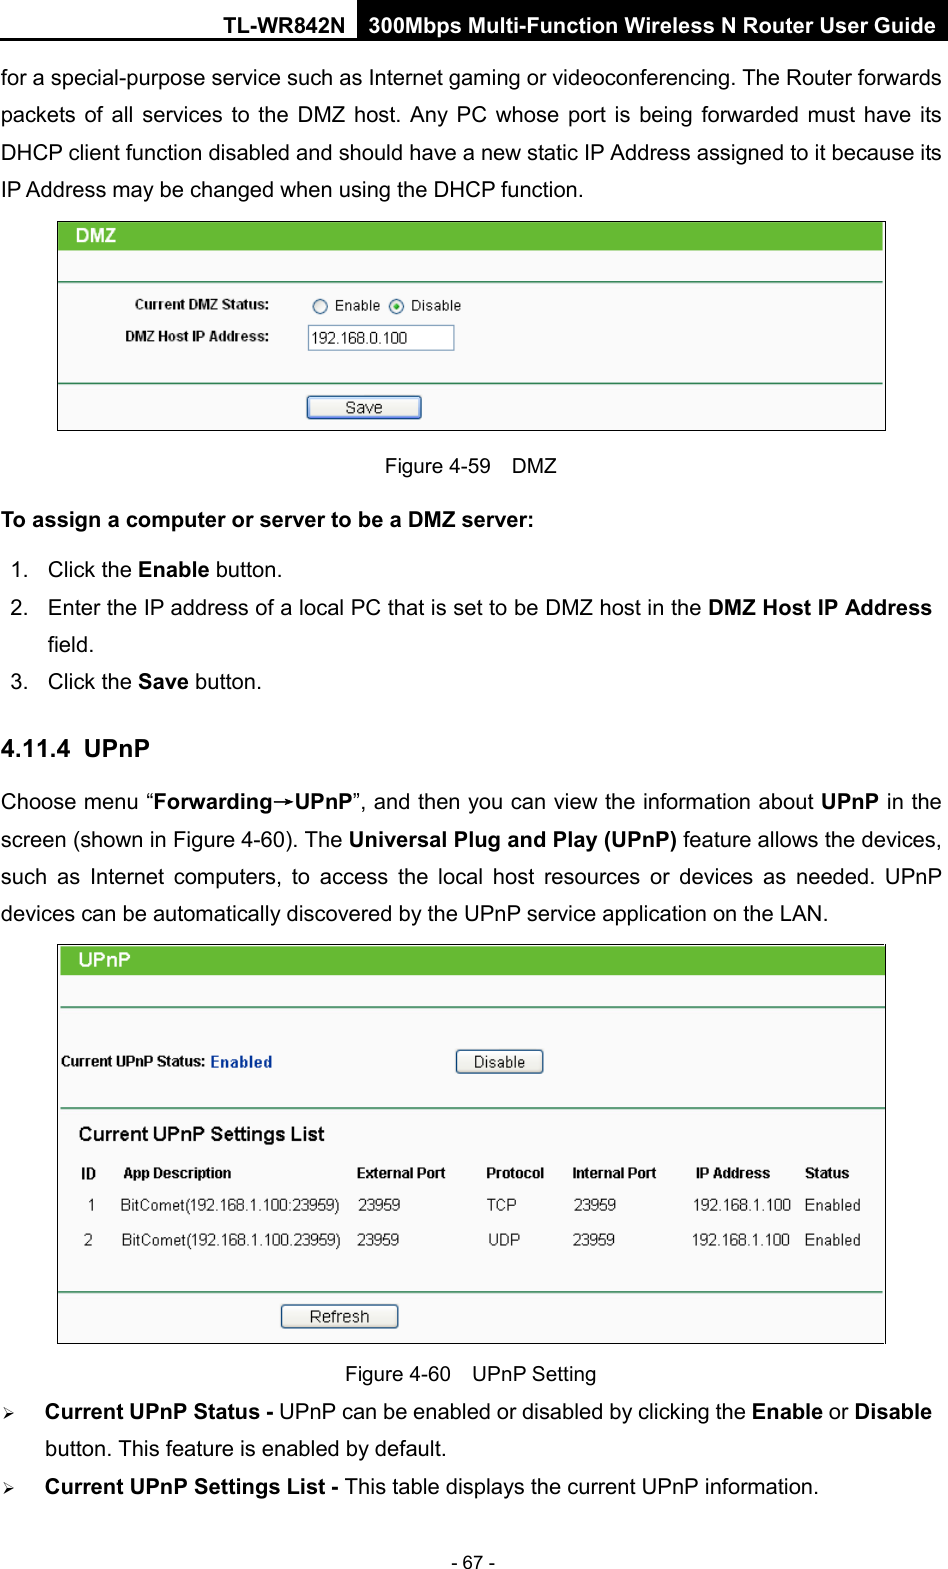 TL-WR842N 300Mbps Multi-Function Wireless N Router User Guide  - 67 - for a special-purpose service such as Internet gaming or videoconferencing. The Router forwards packets of all services to the DMZ host. Any PC whose port is being forwarded must have its DHCP client function disabled and should have a new static IP Address assigned to it because its IP Address may be changed when using the DHCP function.  Figure 4-59  DMZ To assign a computer or server to be a DMZ server:   1. Click the Enable button.   2. Enter the IP address of a local PC that is set to be DMZ host in the DMZ Host IP Address field.   3. Click the Save button.   4.11.4 UPnP Choose menu “Forwarding→UPnP”, and then you can view the information about UPnP in the screen (shown in Figure 4-60). The Universal Plug and Play (UPnP) feature allows the devices, such as Internet computers, to access the local host resources or devices as needed. UPnP devices can be automatically discovered by the UPnP service application on the LAN.  Figure 4-60  UPnP Setting  Current UPnP Status - UPnP can be enabled or disabled by clicking the Enable or Disable button. This feature is enabled by default.  Current UPnP Settings List - This table displays the current UPnP information. 